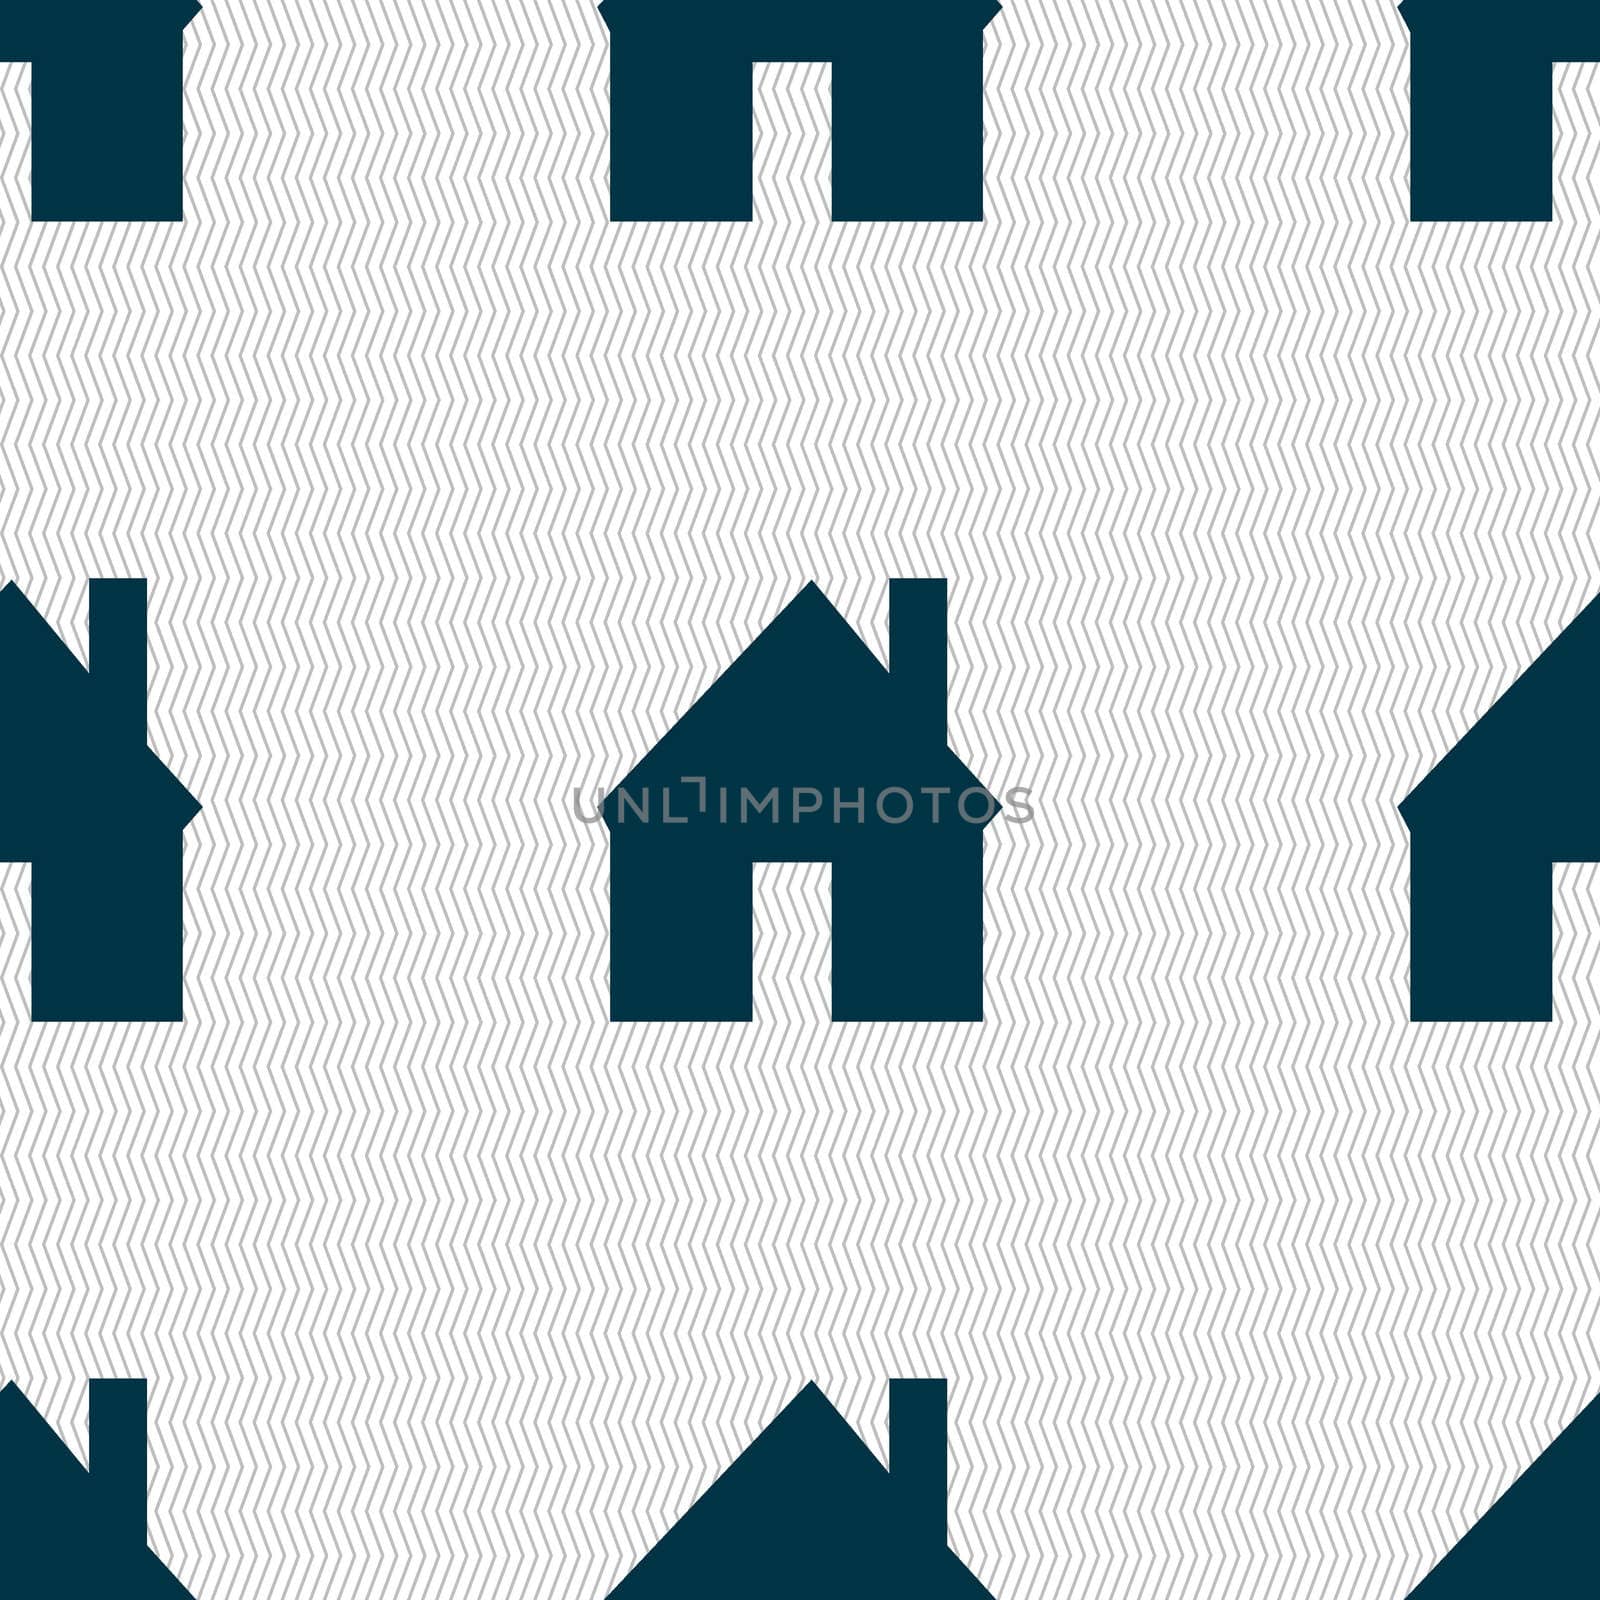 Home sign icon. Main page button. Navigation symbol. Seamless abstract background with geometric shapes. illustration